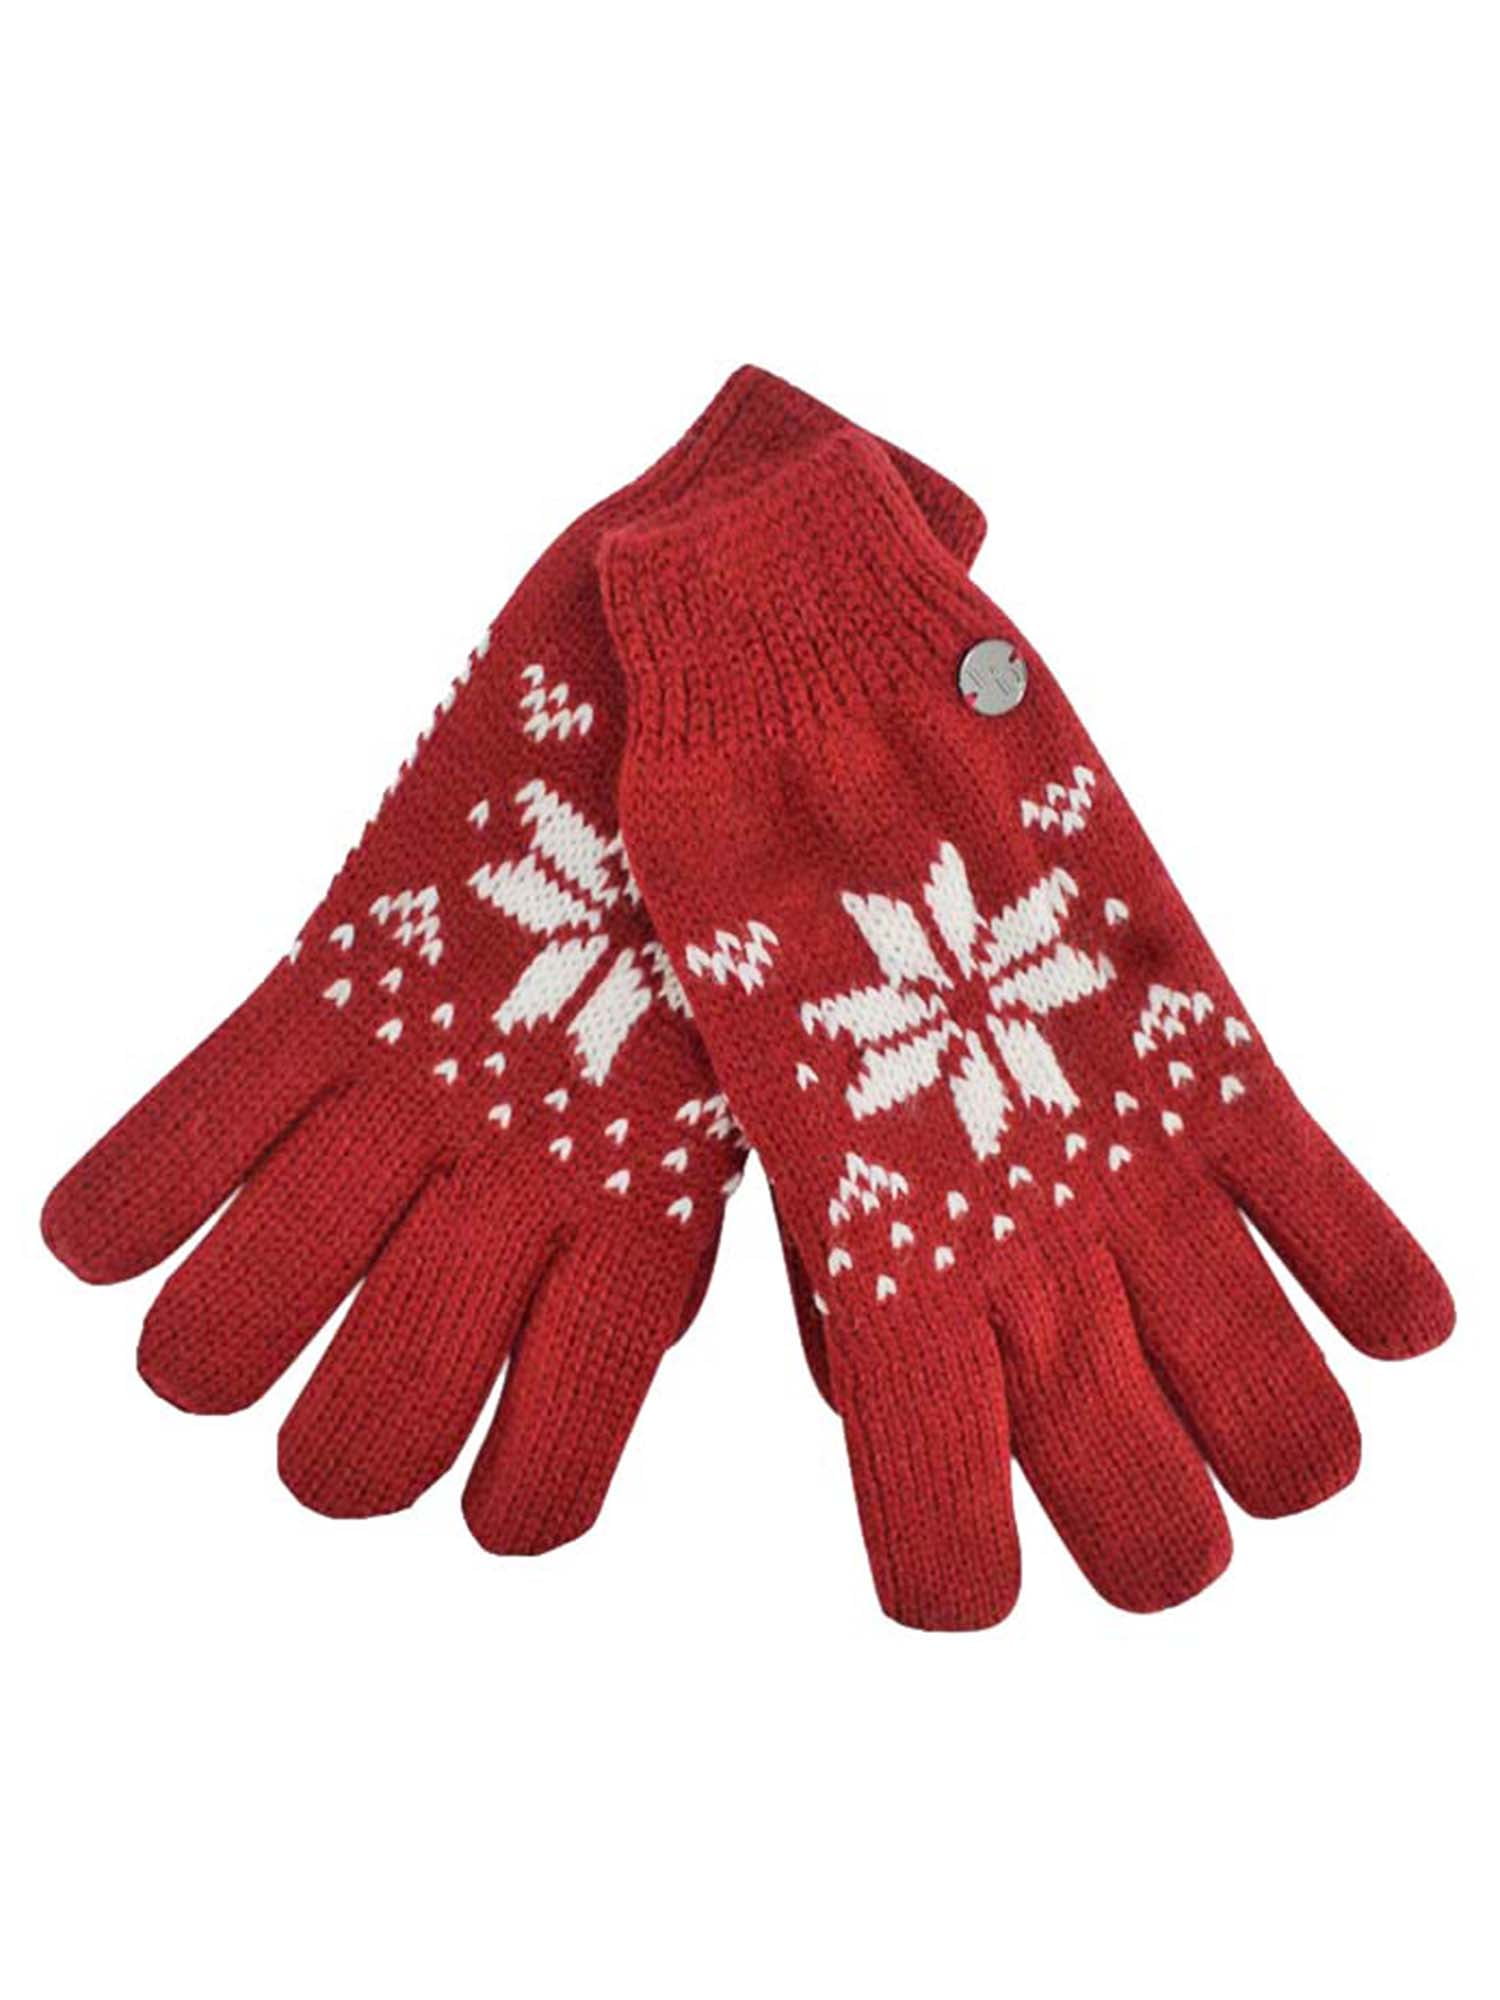 Unisex Cable Knitted Thinsulate Insulation Lined Gloves Thermal Winter Warm 